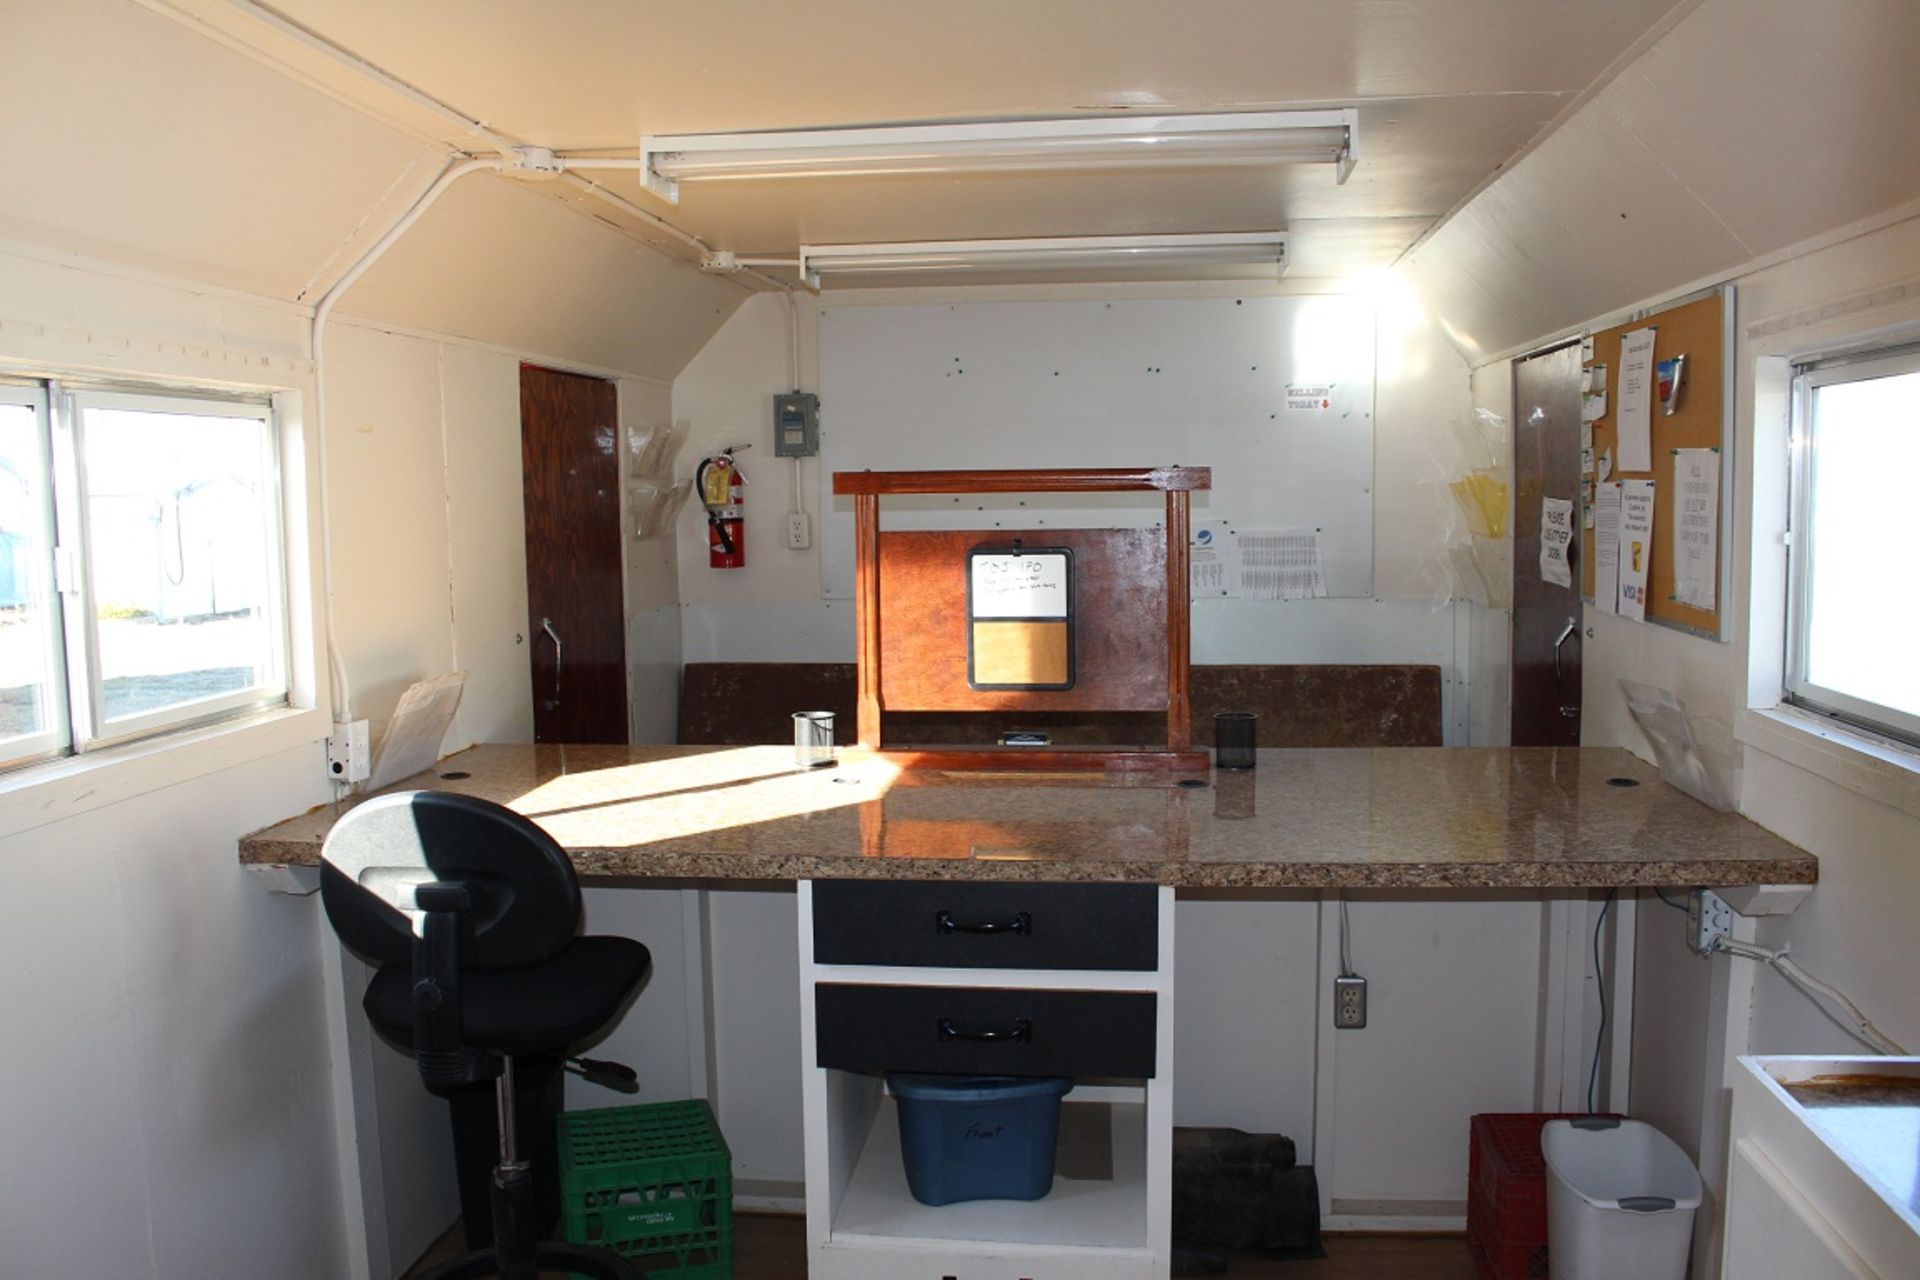 2002 SHOP BUILT 24' T/A 5W AUCTION OFFICE TRAILER W/LIGHTS, HEATER, BATHROOM & AUCTION/BOOTH - Image 6 of 8